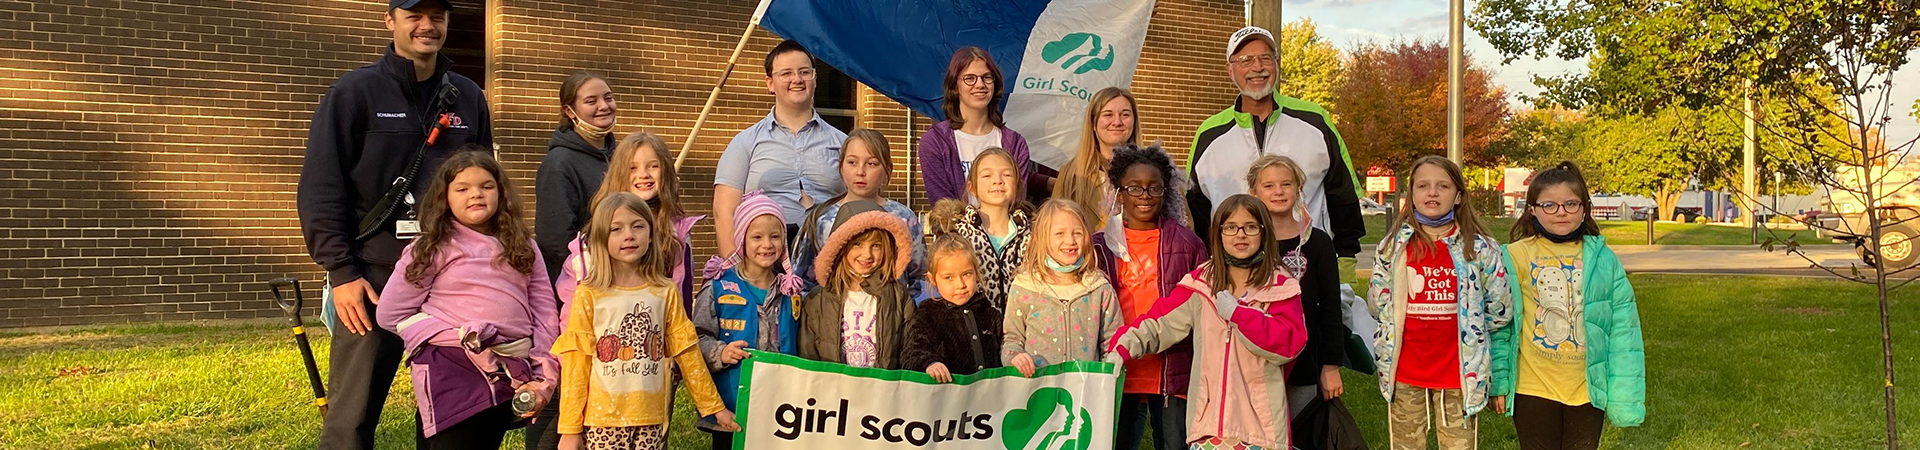  girl scout service unit taking a group photo with girl scout flags outside 